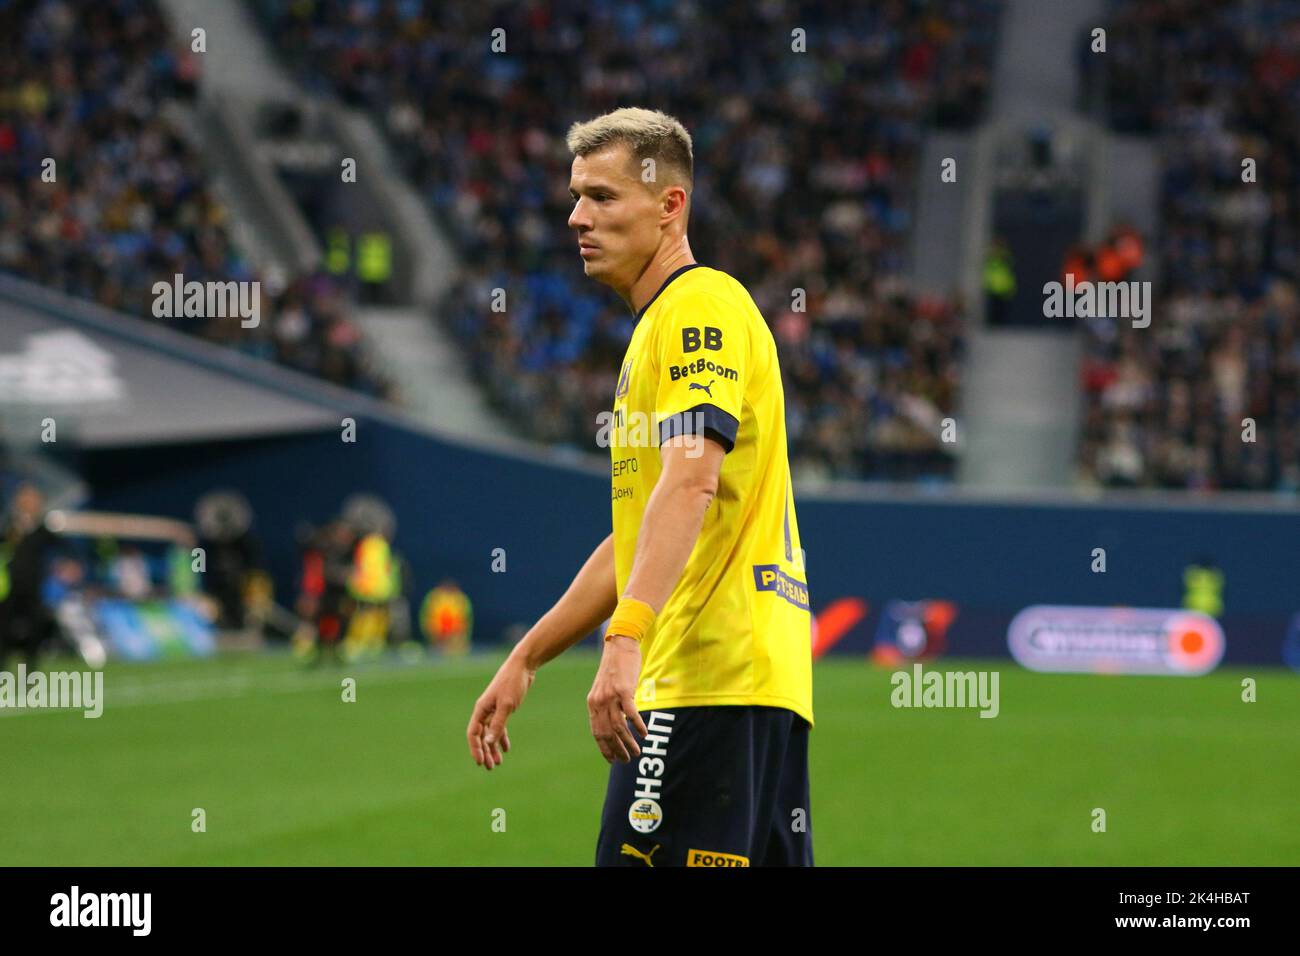 Saint Petersburg, Russia. 02nd Oct, 2022. Dmitry Poloz (No.7) of Rostov seen in action during the Russian Premier League football match between Zenit Saint Petersburg and Rostov at Gazprom Arena. Final score; Zenit 3:1 Rostov. (Photo by Maksim Konstantinov/SOPA Images/Sipa USA) Credit: Sipa USA/Alamy Live News Stock Photo